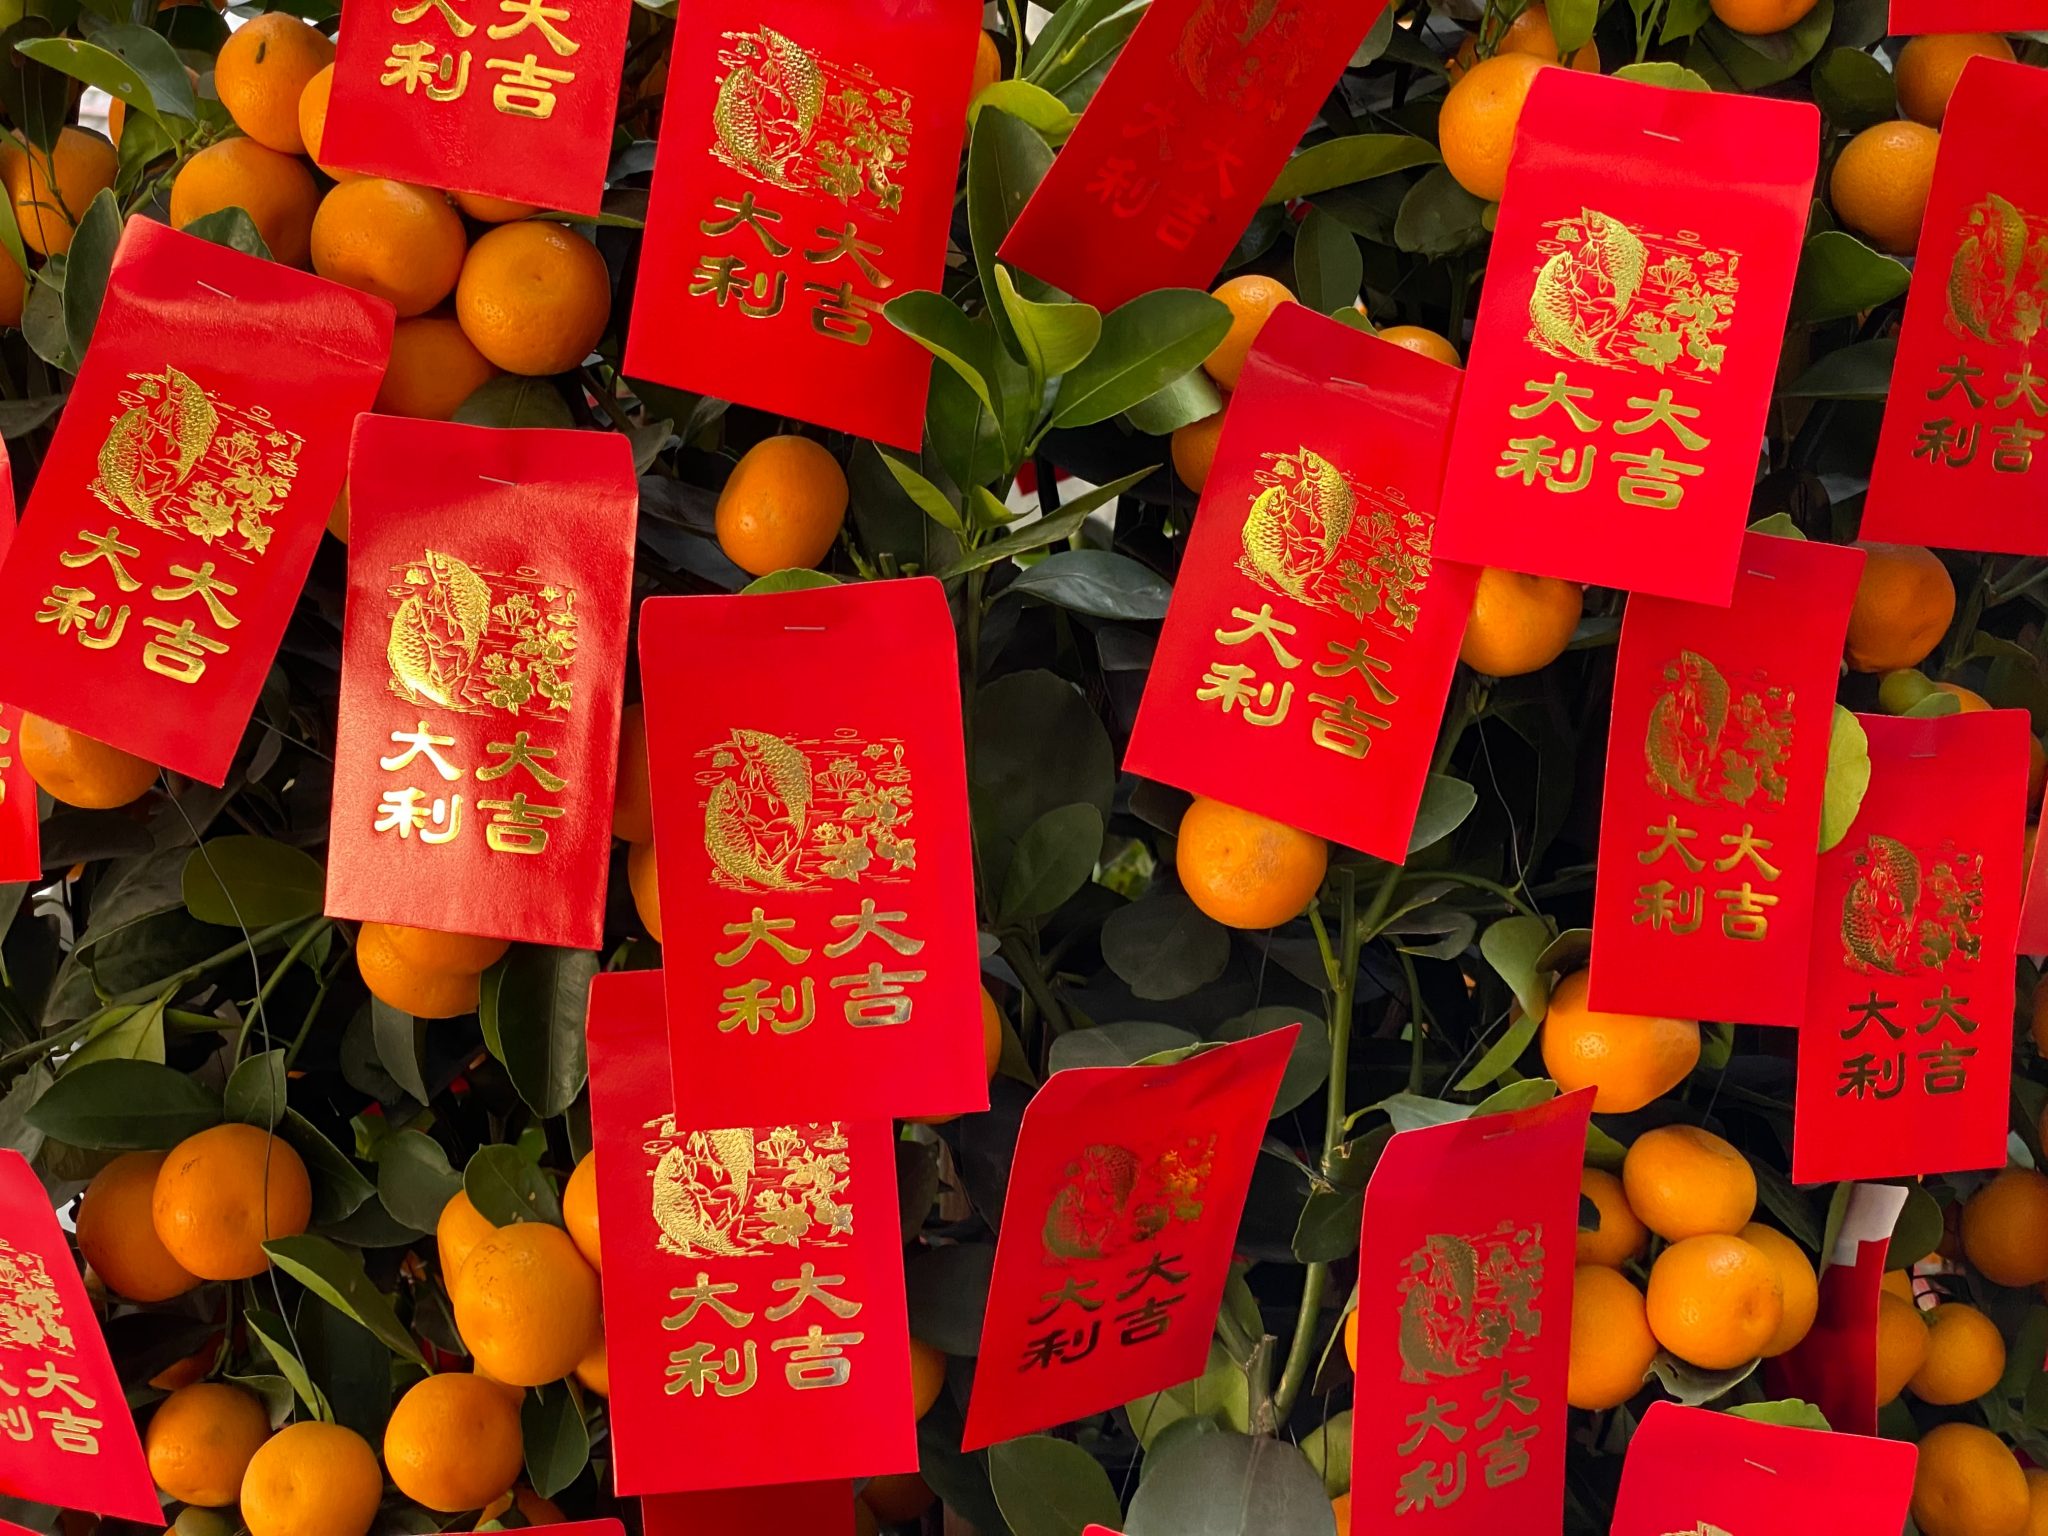 7 Chinese New Year traditions to fill your holiday with joy, luck and